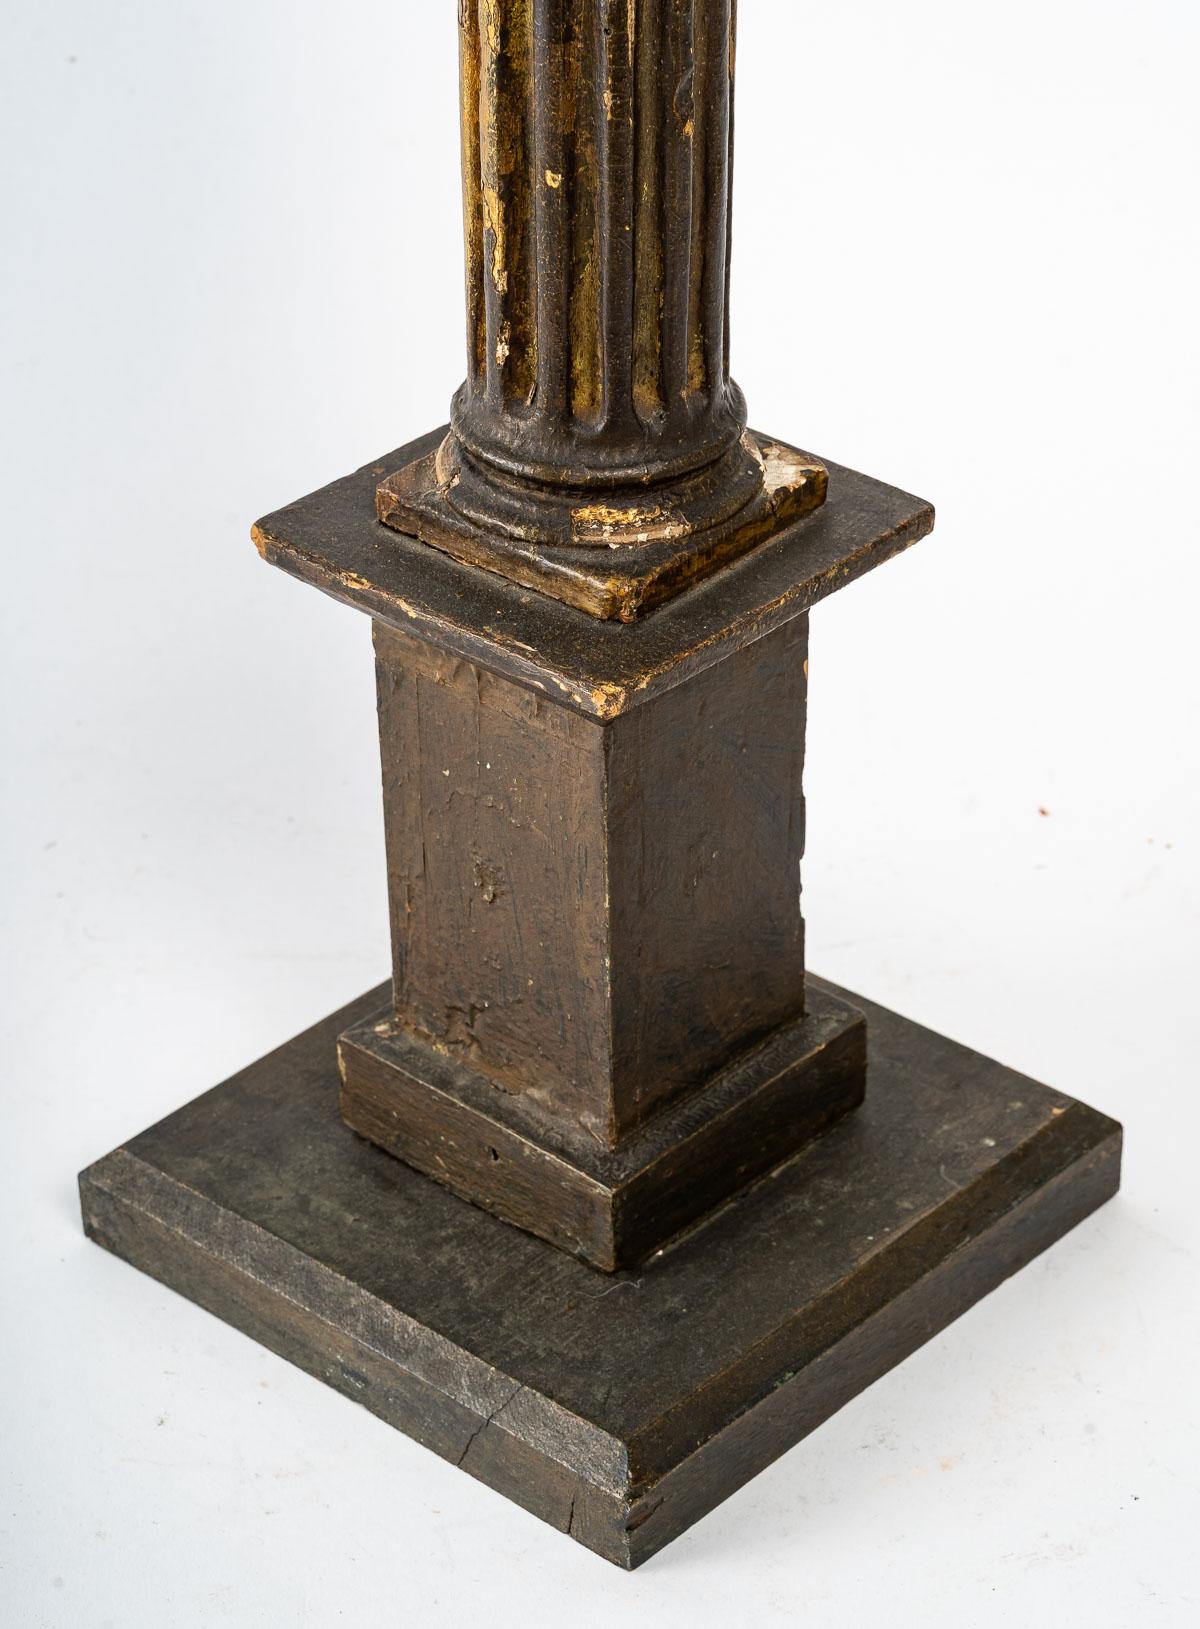 Carved and gilded wood candle stick, 19th century
Measures: H: 68 cm, W: 18 cm, D: 18 cm.